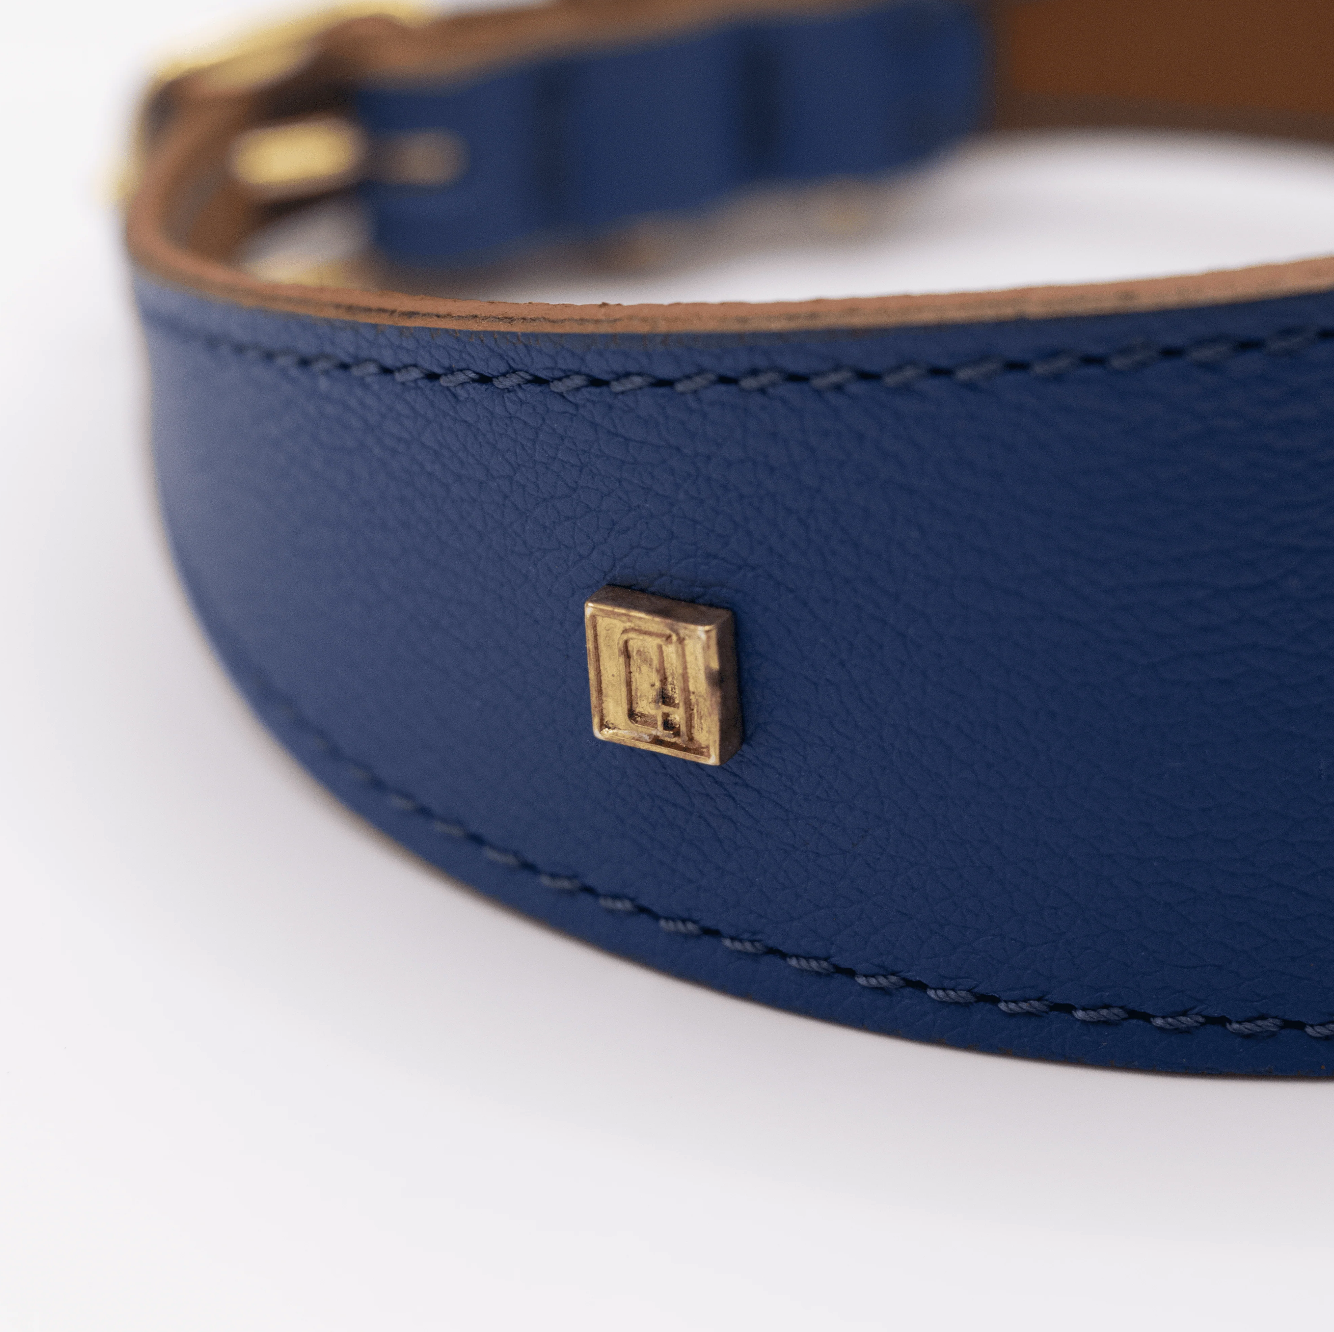 Soft Leather Hound Collar Electric Blue